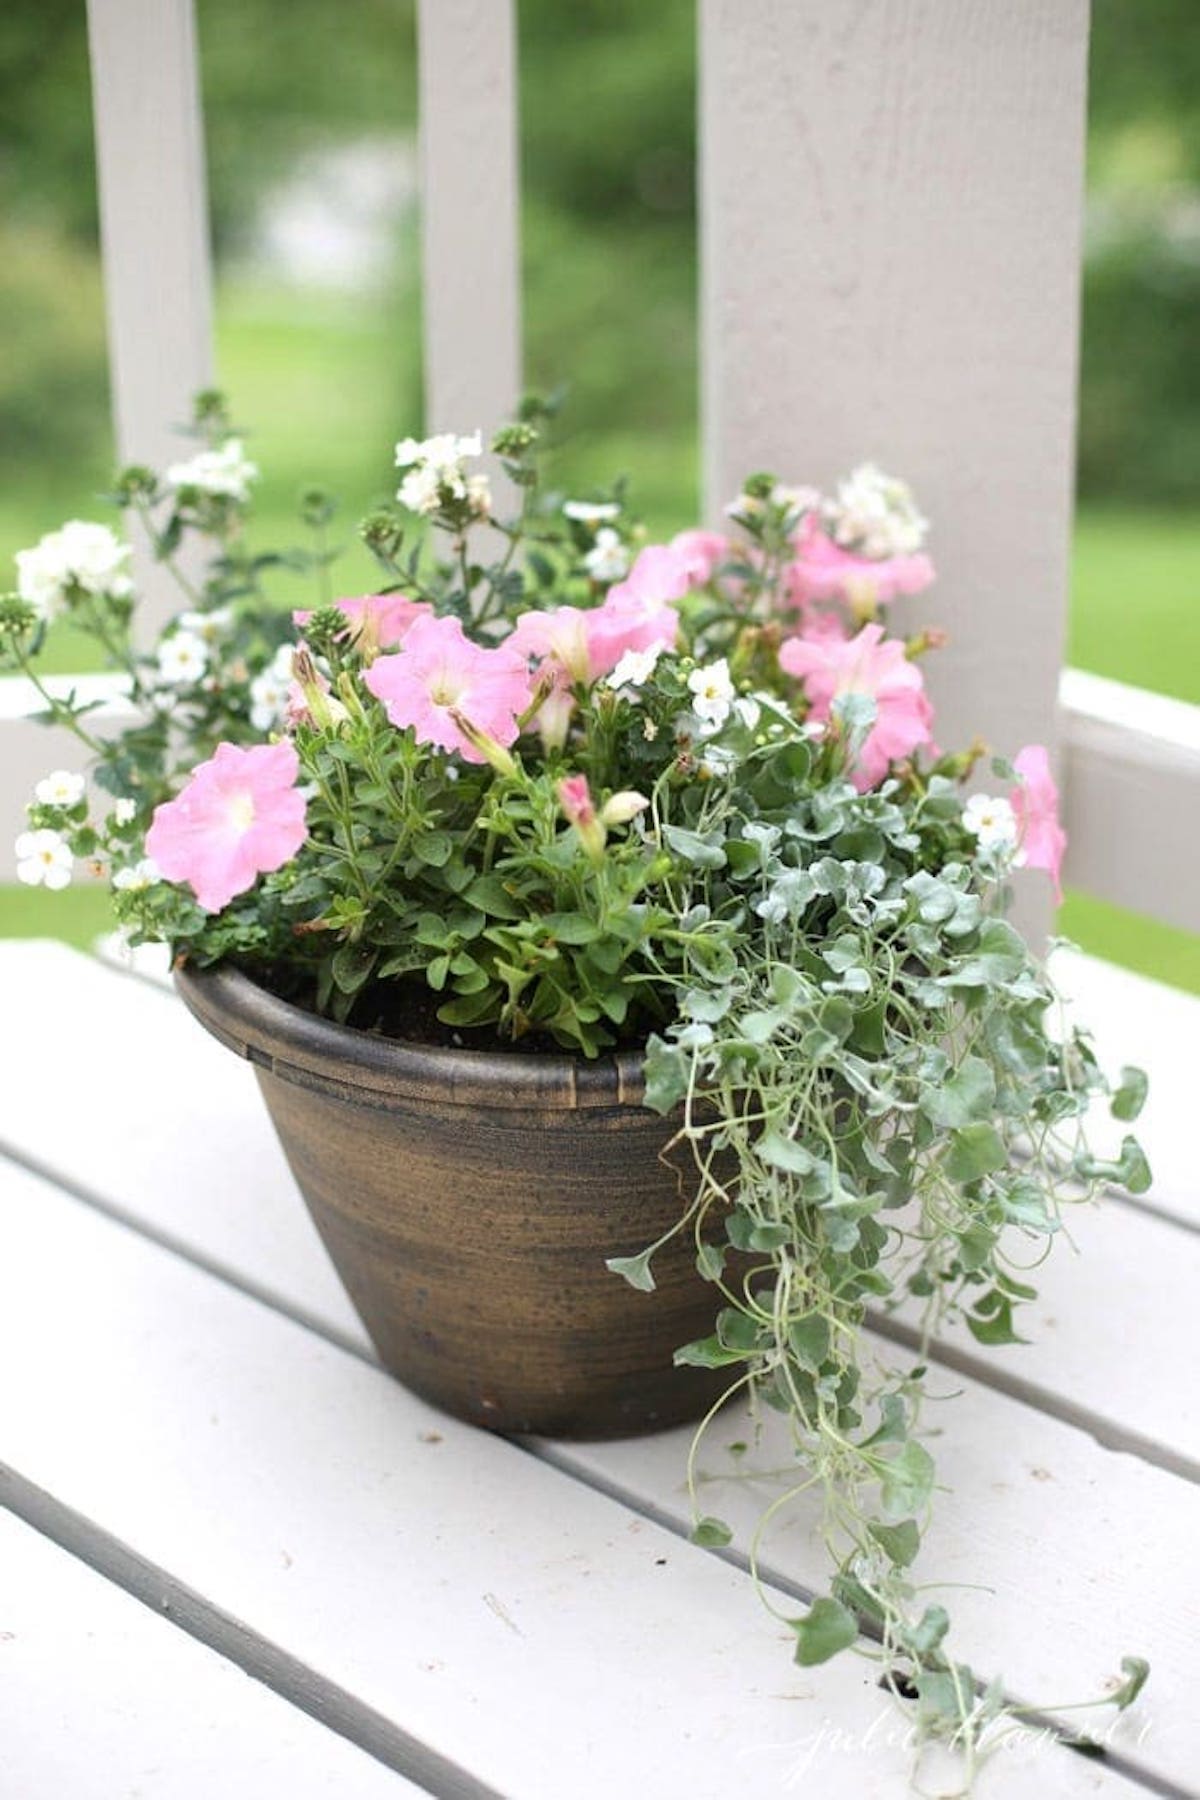 A flower pot on a porch with pink flowers - a perfect example of flower pot design.